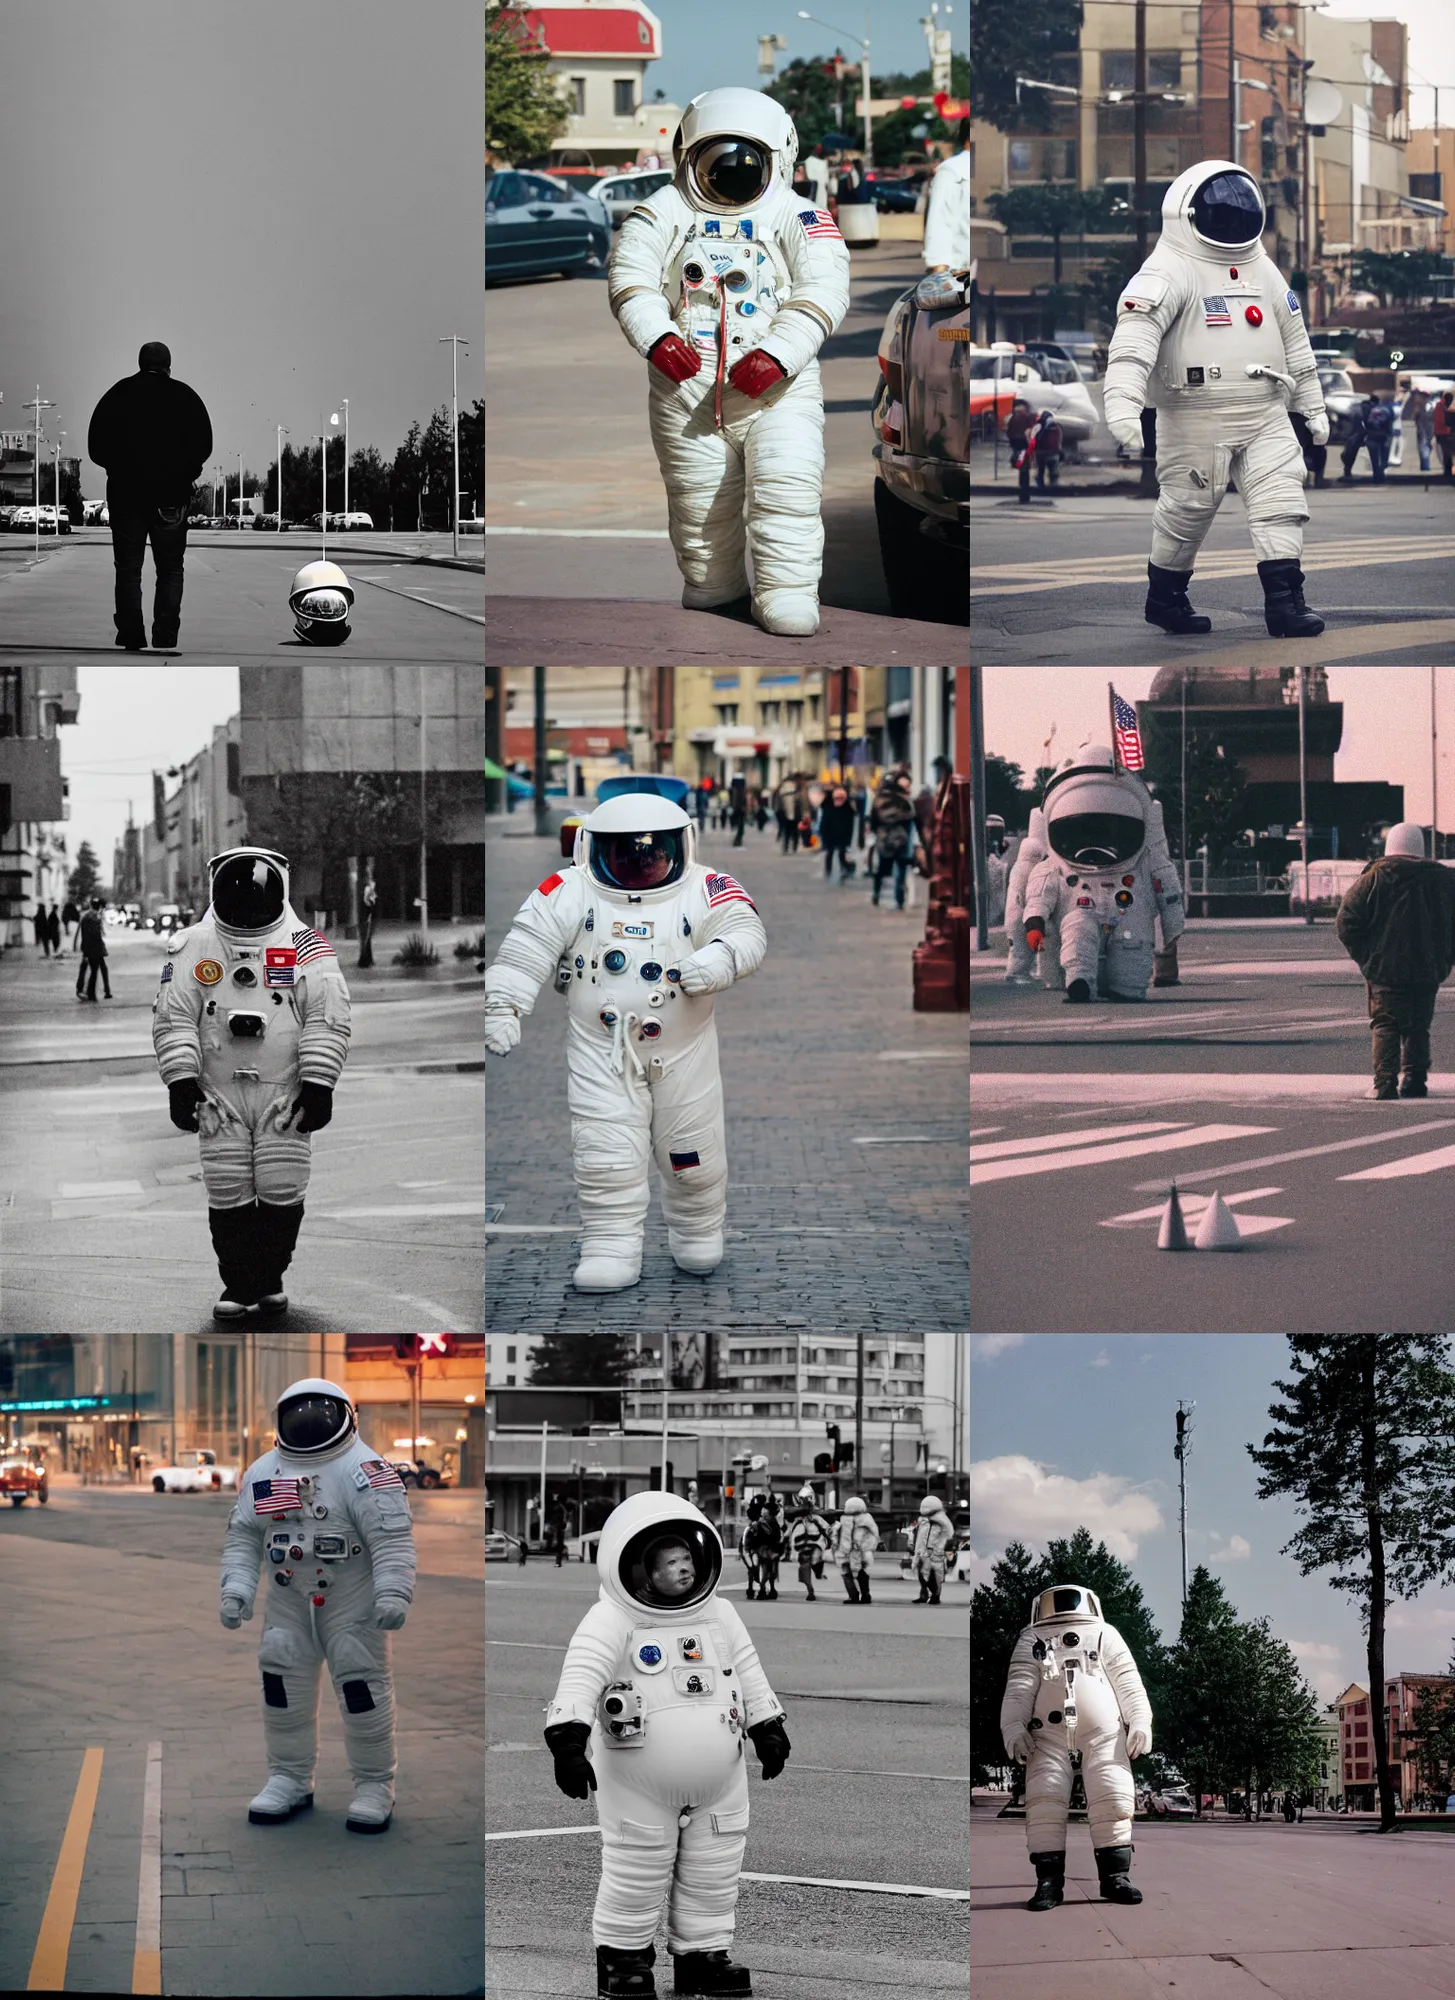 Prompt: color photograph by legnica, extreme low angle long shot, white extremely oversized giant chubby fat american astronaut in spacesut with oversized helmet walking in legnica, in the background are tiny soldiers, movie still, bokeh, canon 5 0 mm, cinematic lighting, dramatic, film, photography, depth of field, award - winning, overcast, 8 k, 3 5 mm film grain